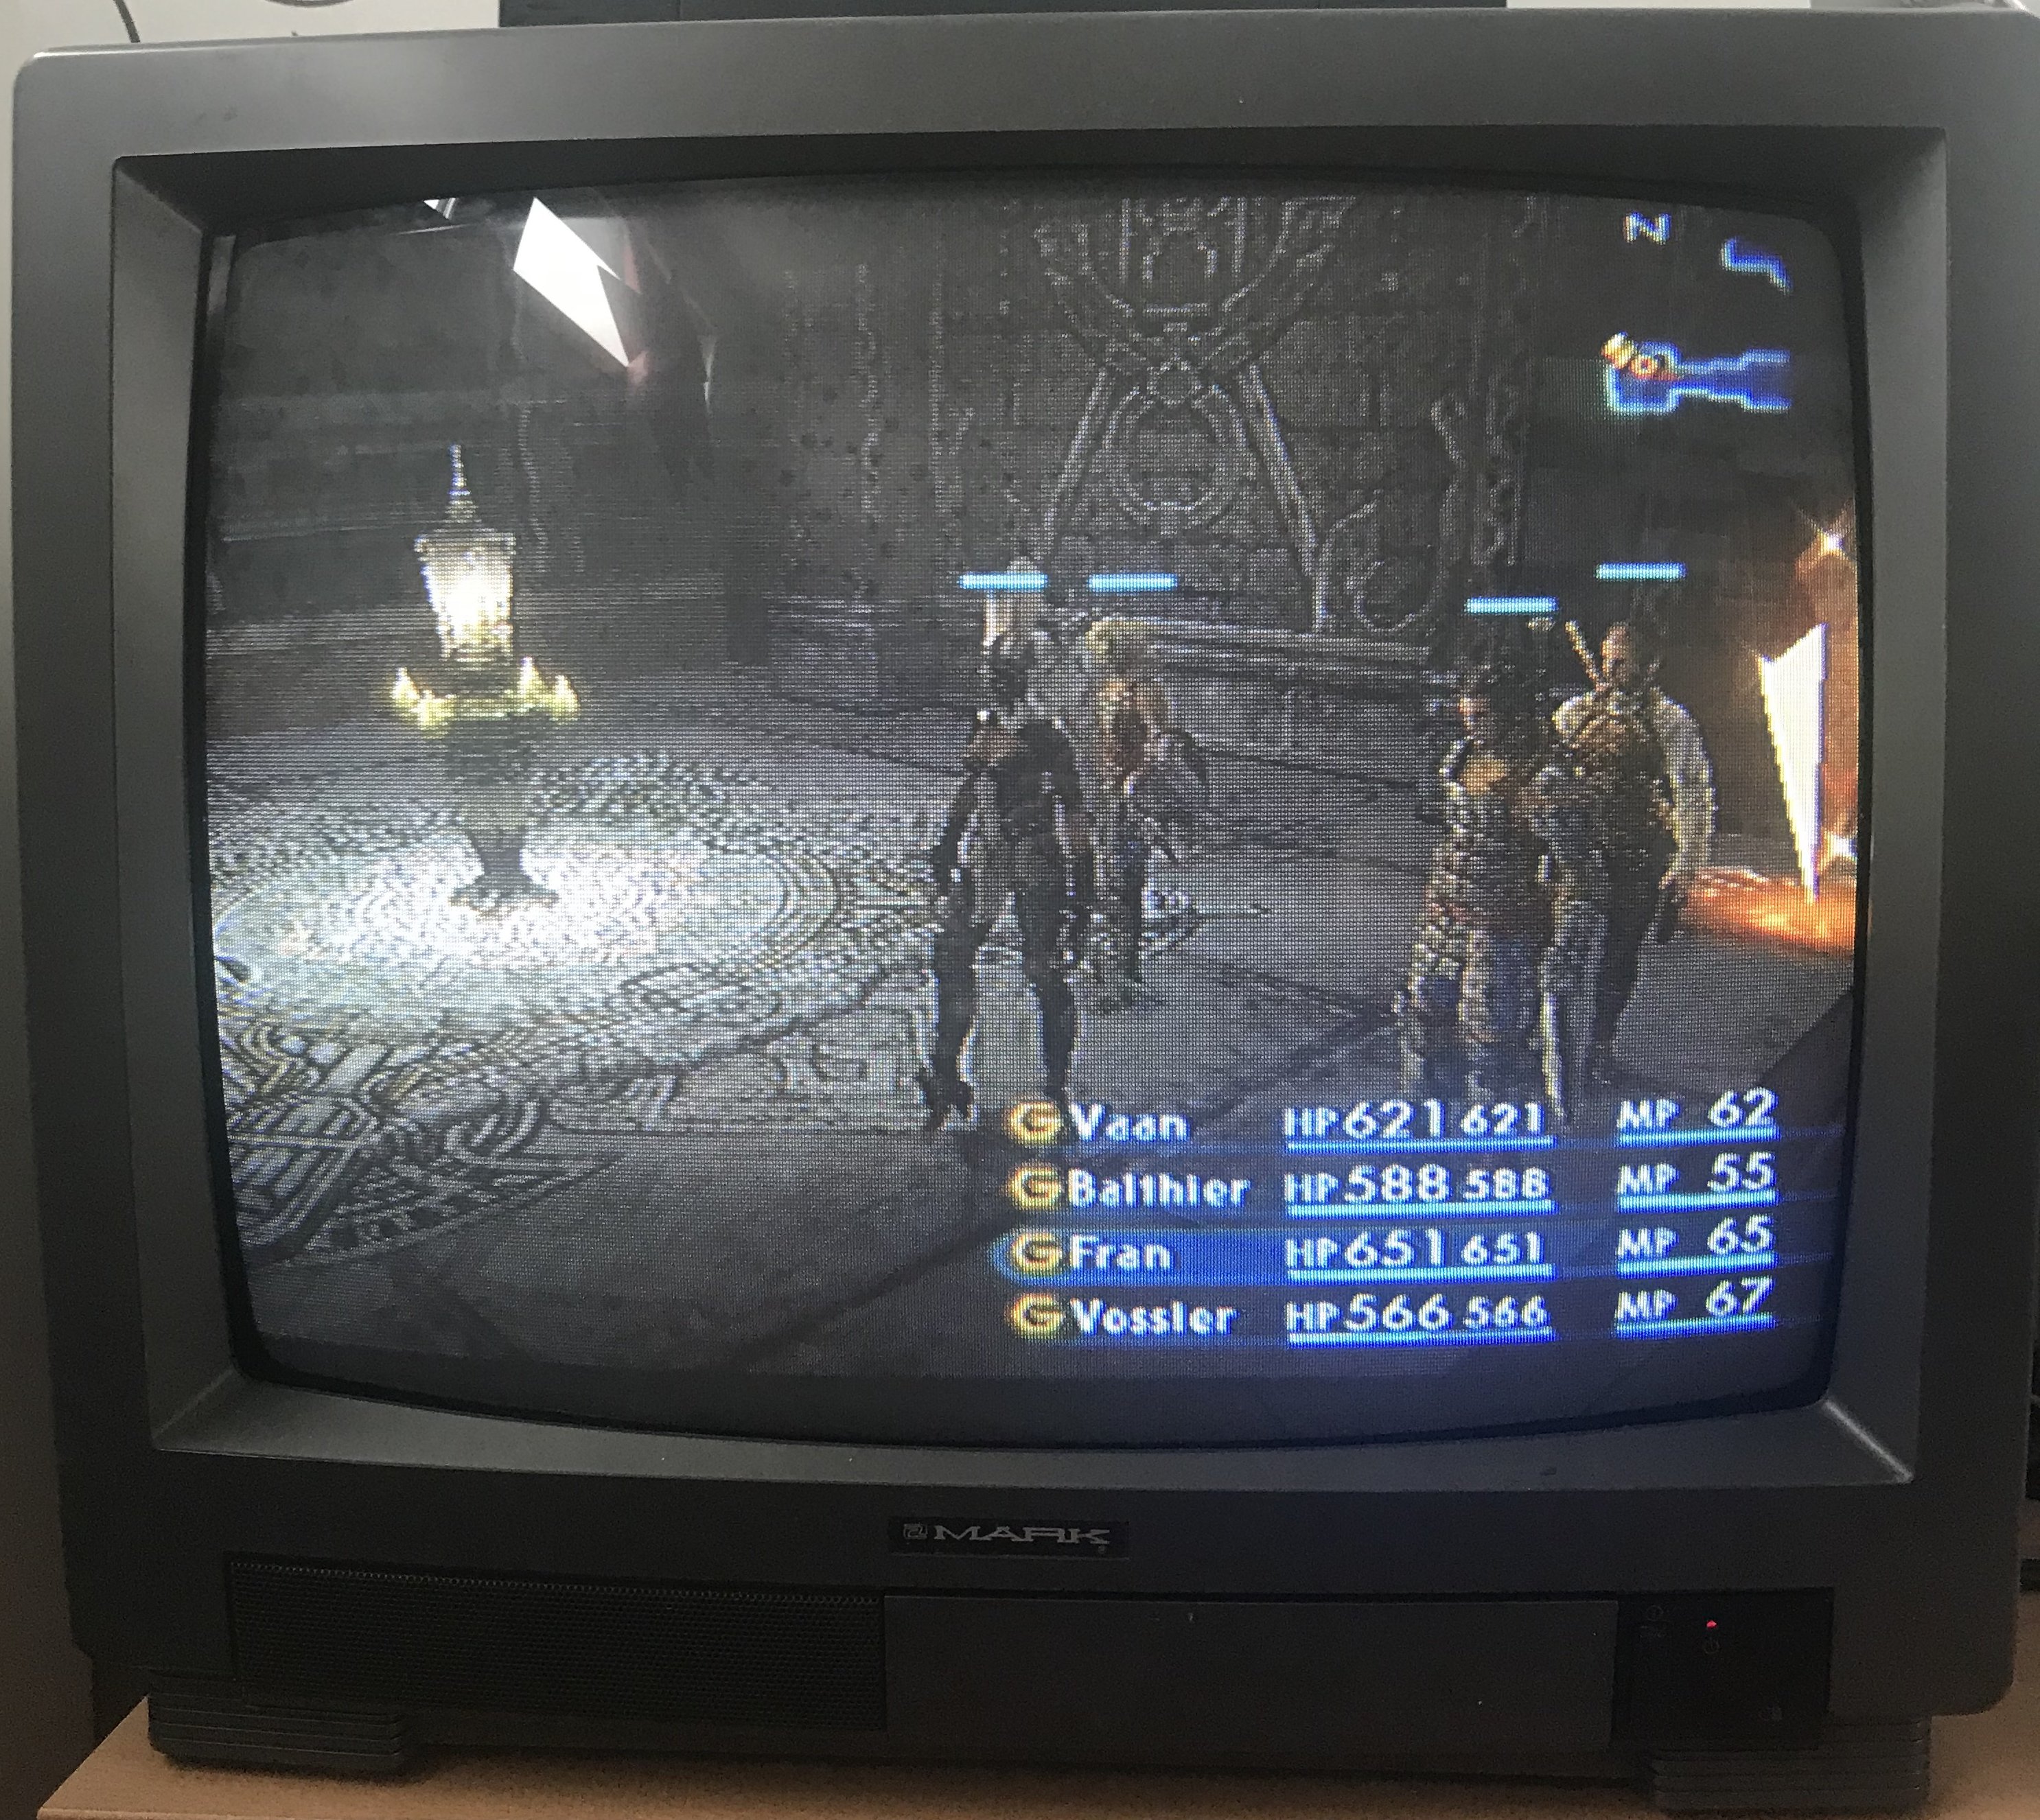 Photo of a square CRT television displaying FINAL FANTASY® XII in standard definition, showing an in-game scene where the characters Vaan (HP 621/621, MP 62), Balthier (HP 588/588, MP 55), Fran (HP 651/651, MP 65) and Vossler (HP 566/566, MP 67) are standing at the entrance of The Tomb of Raithwall.